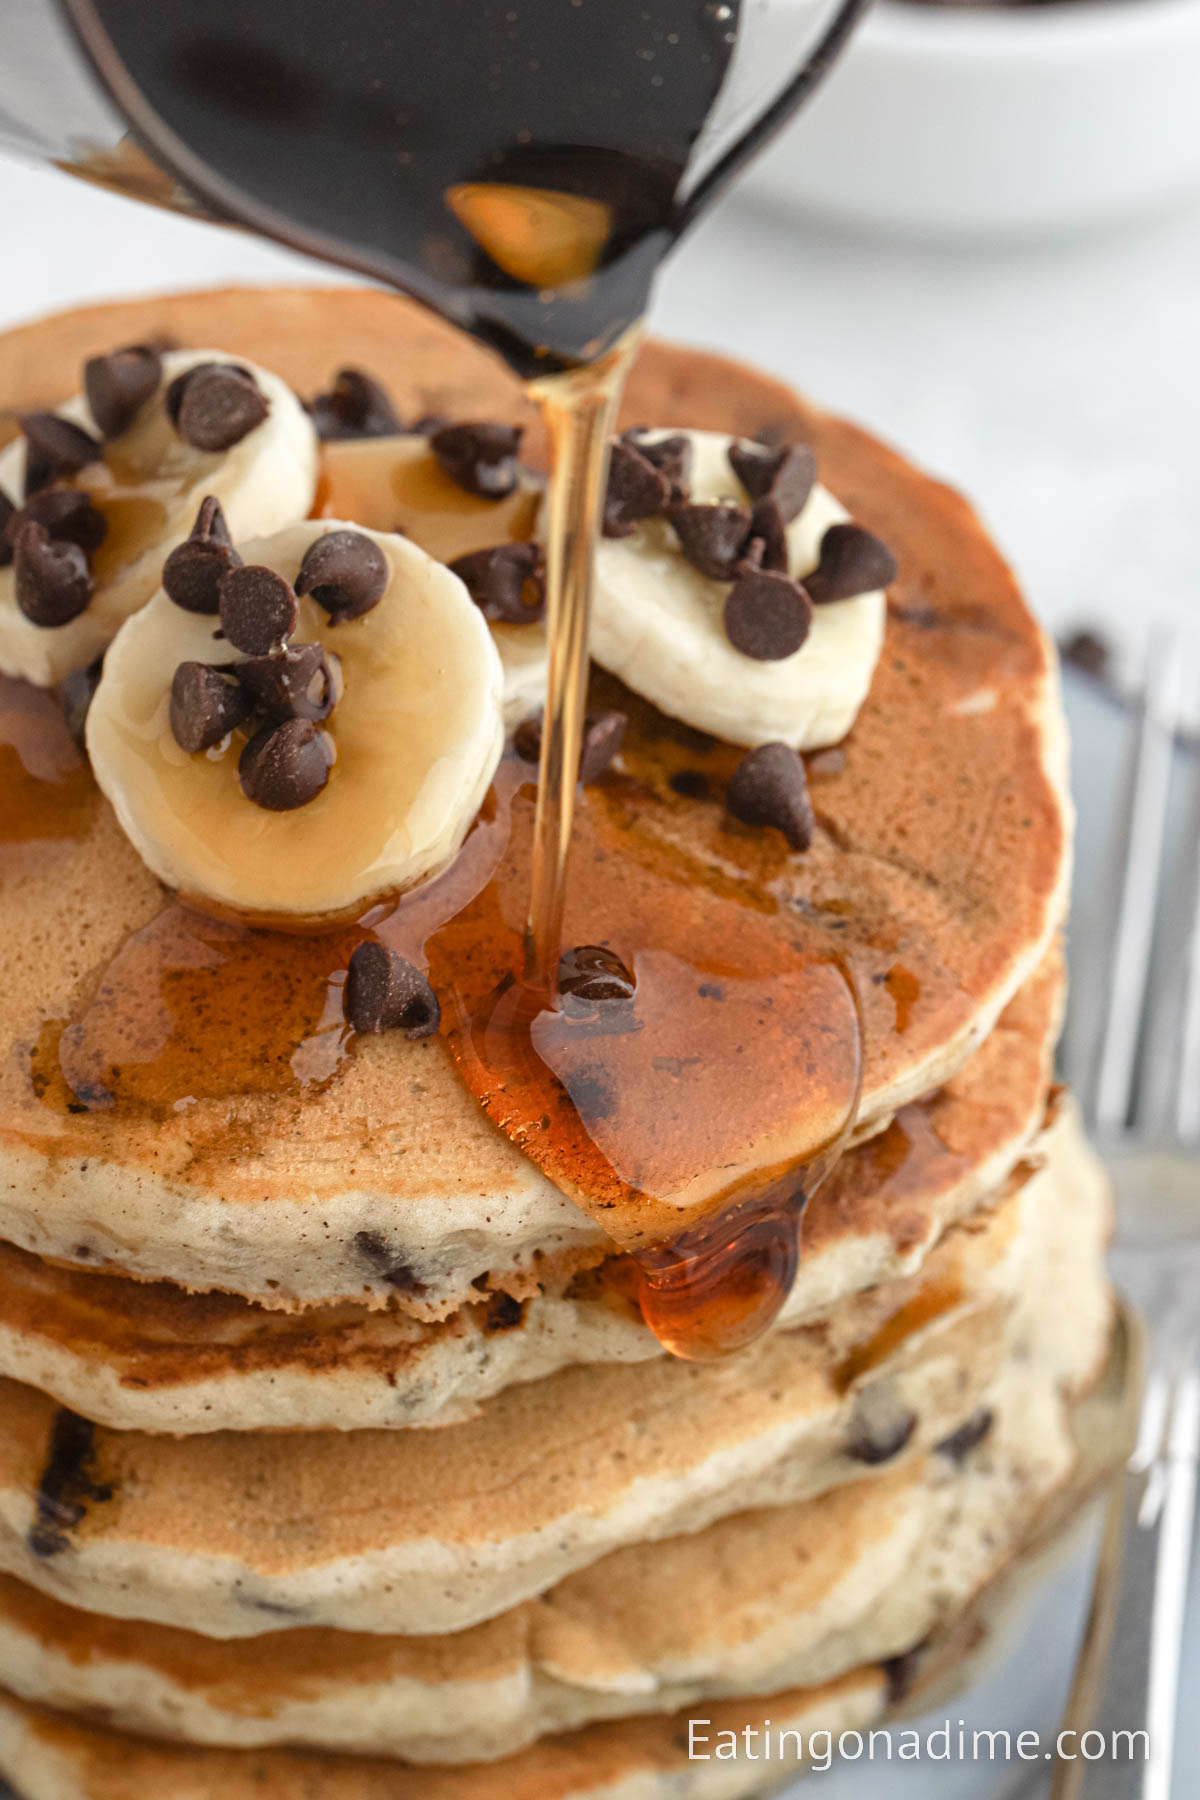 Stacked Banana Chocolate Chip Pancakes on a plate with syrup being over the top